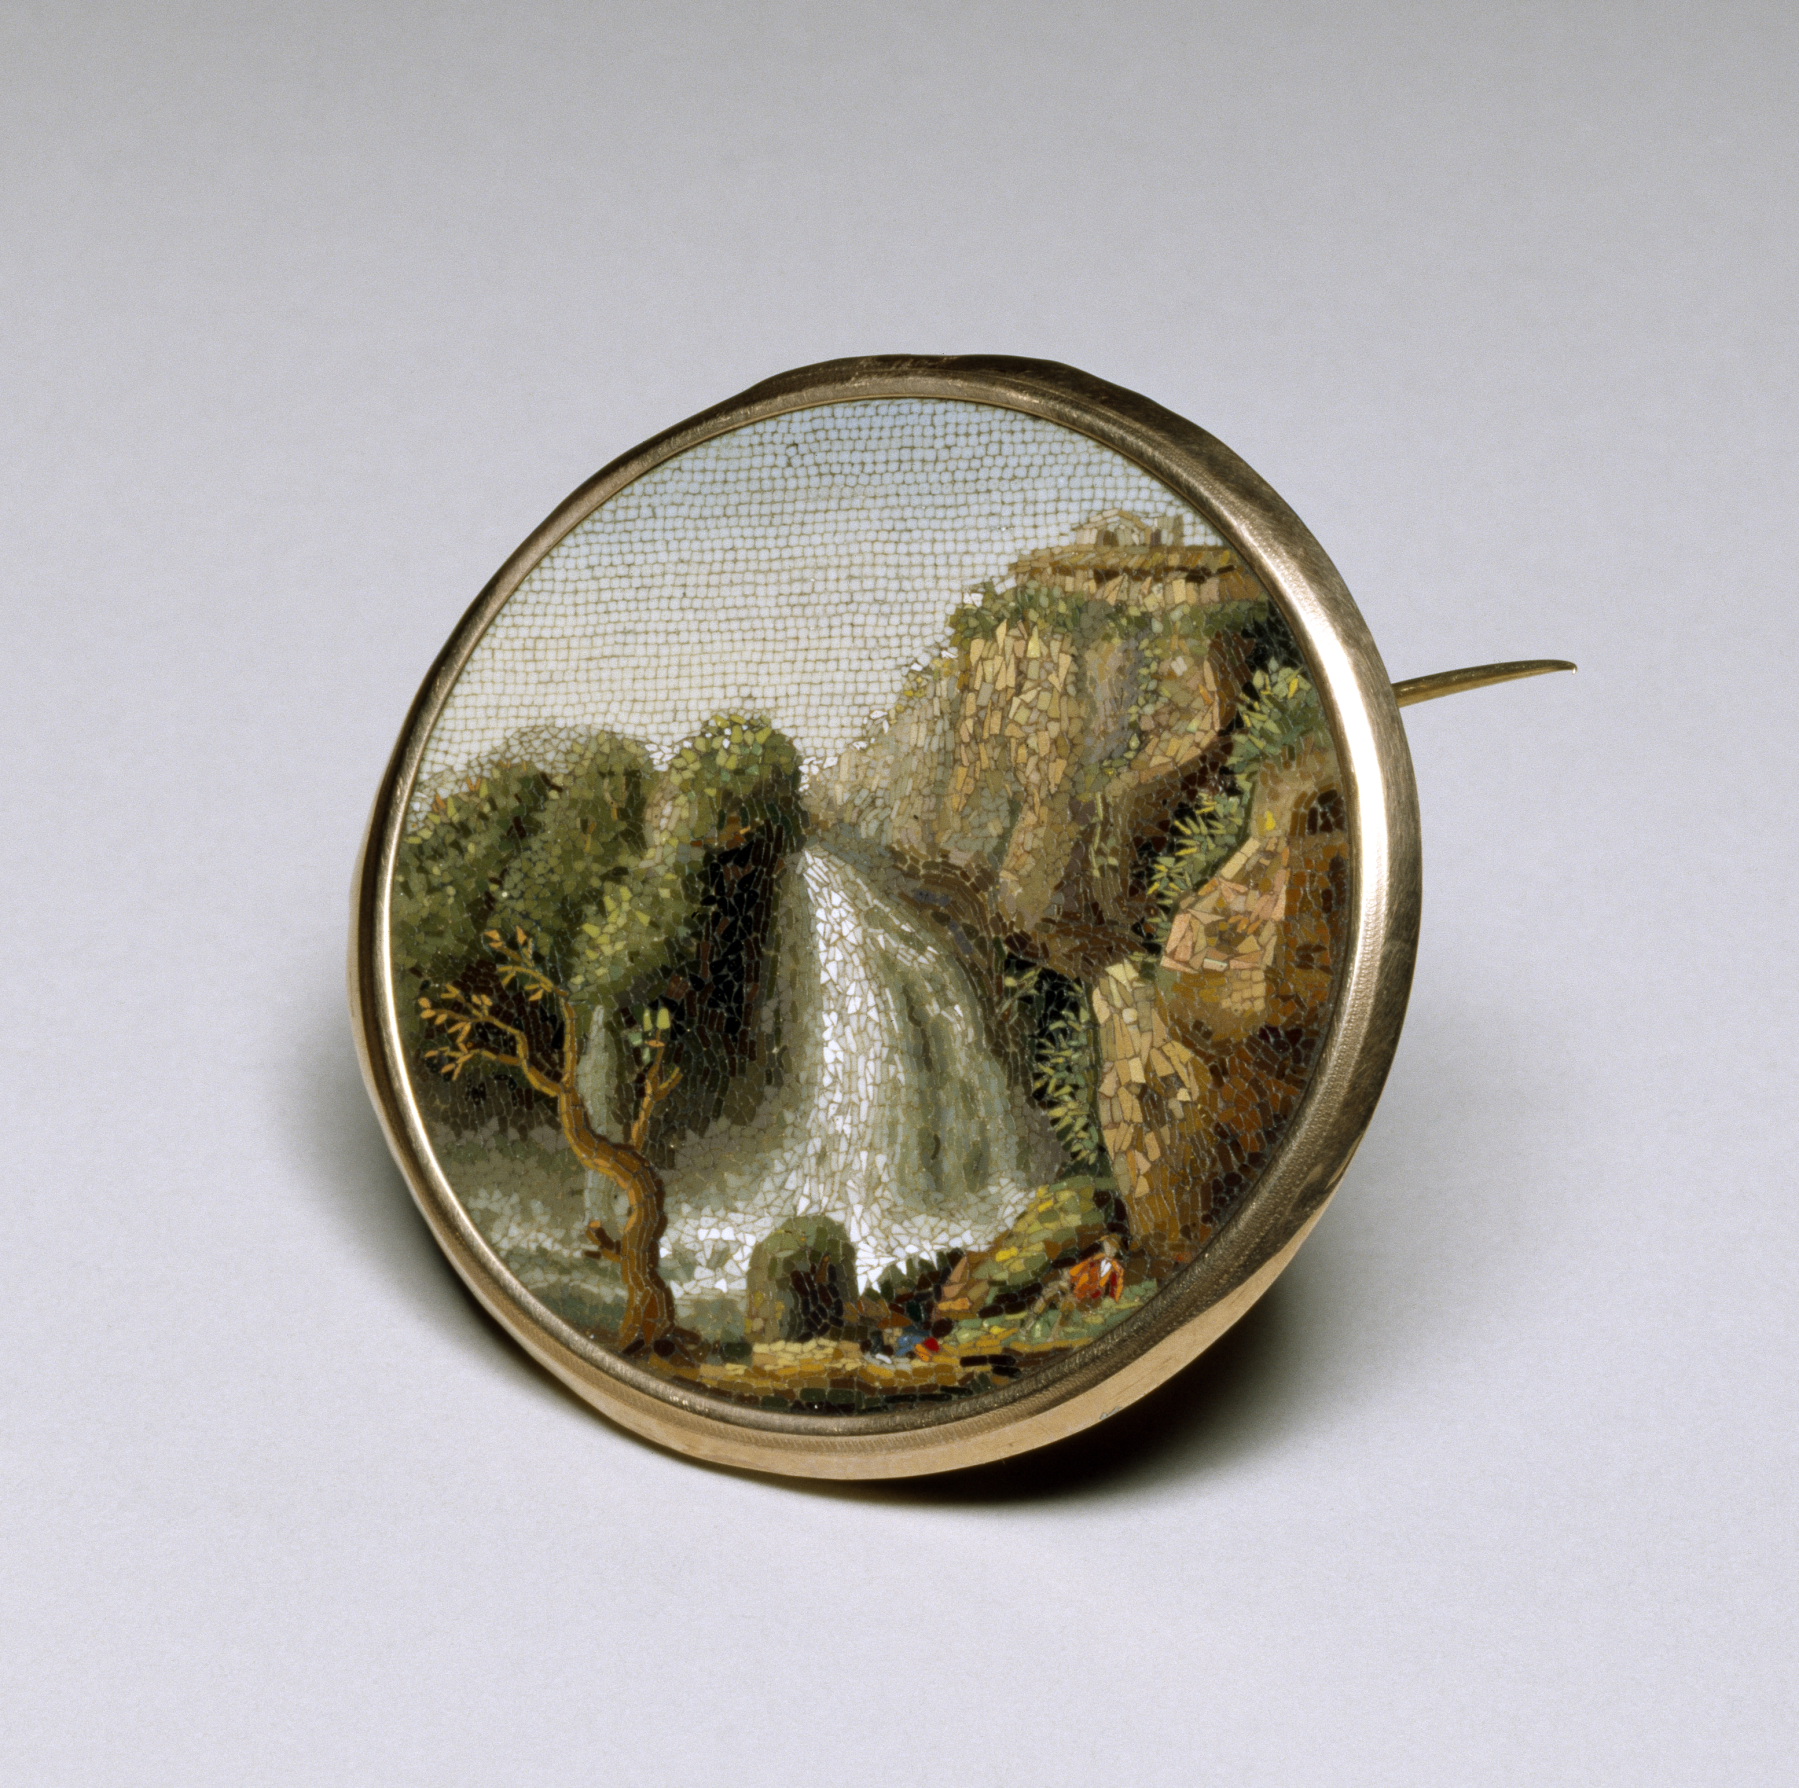 Image for Brooch with a Landscape Scene